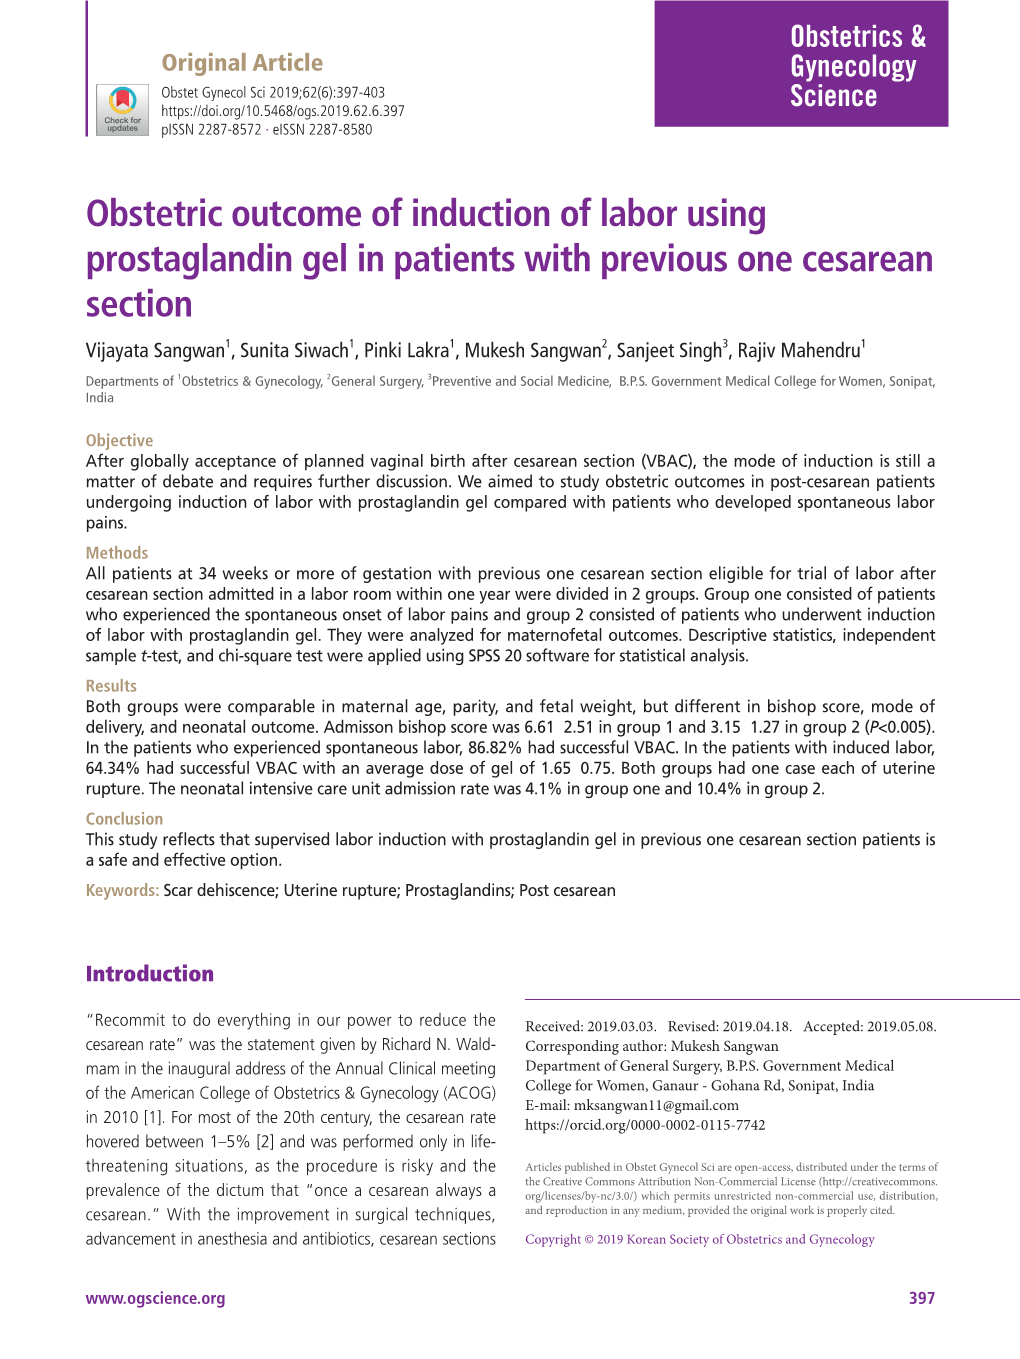 Obstetric Outcome of Induction of Labor Using Prostaglandin Gel in Patients